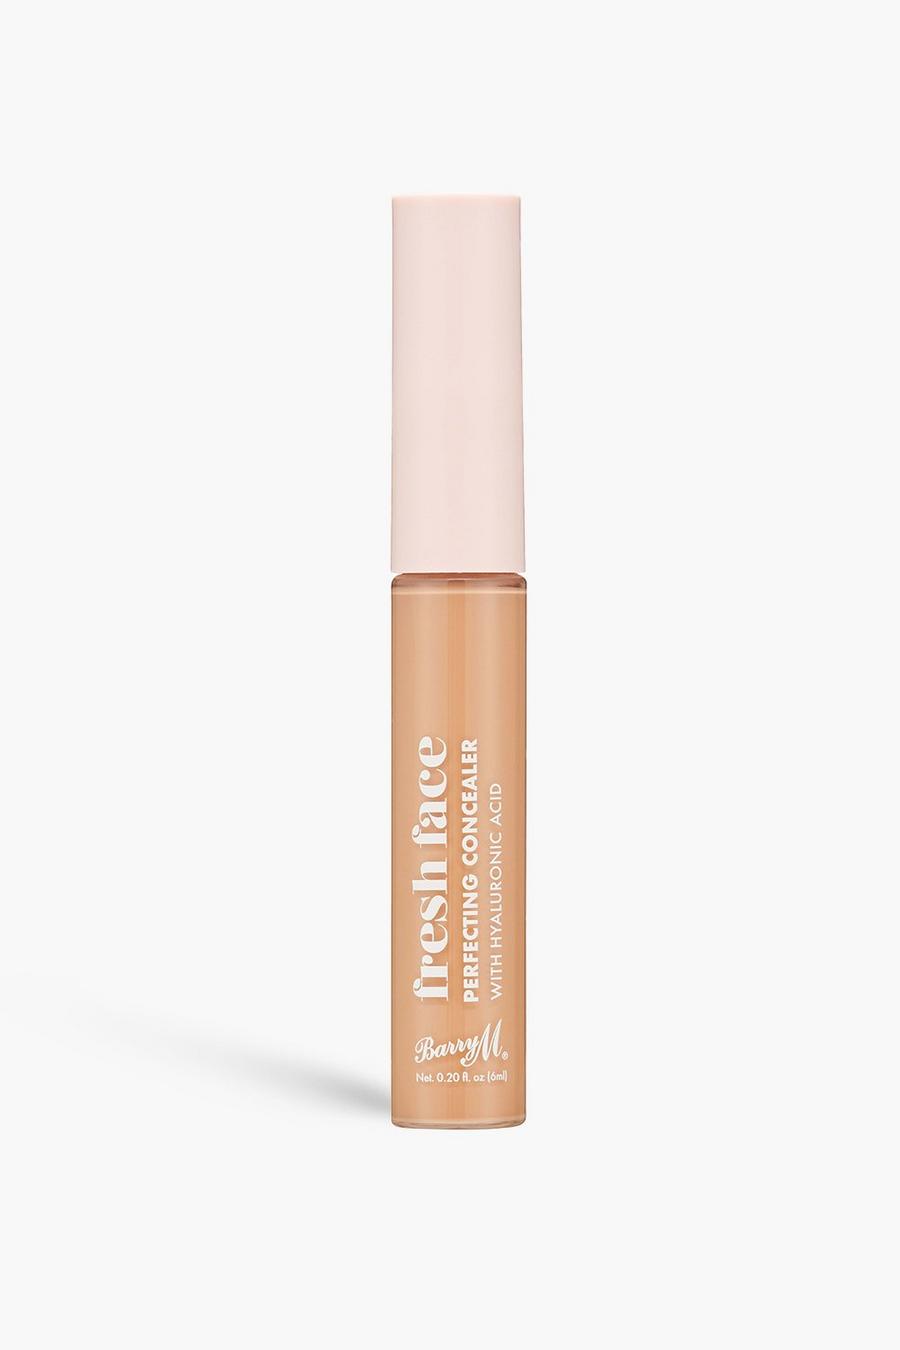 Barry M Fresh Face Perfecting Concealer 5, Tan brown